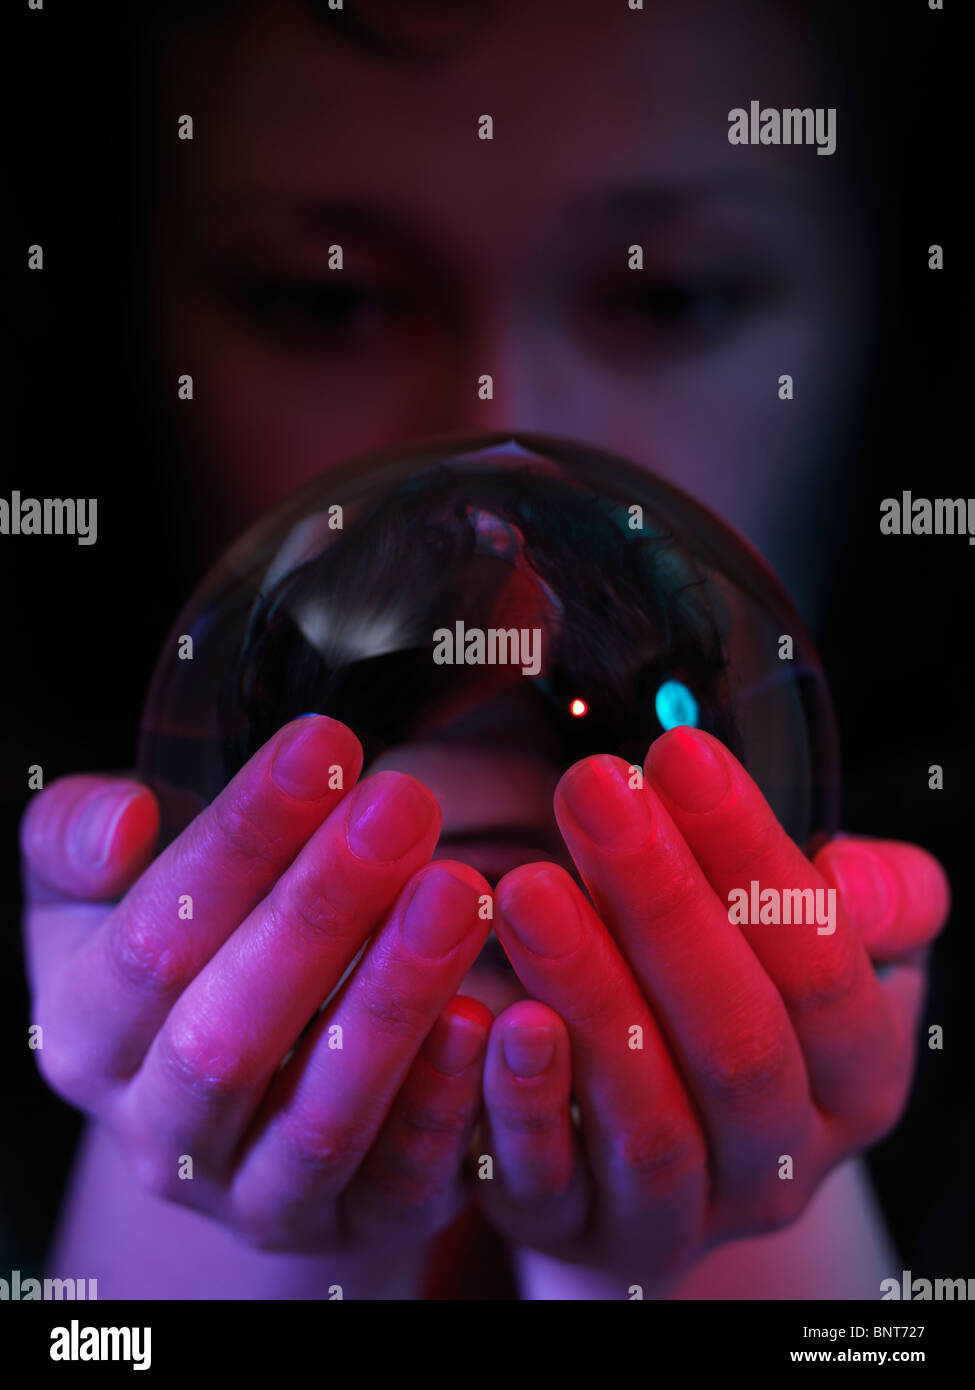 Woman looking into a crystal ball in her hands Stock Photo